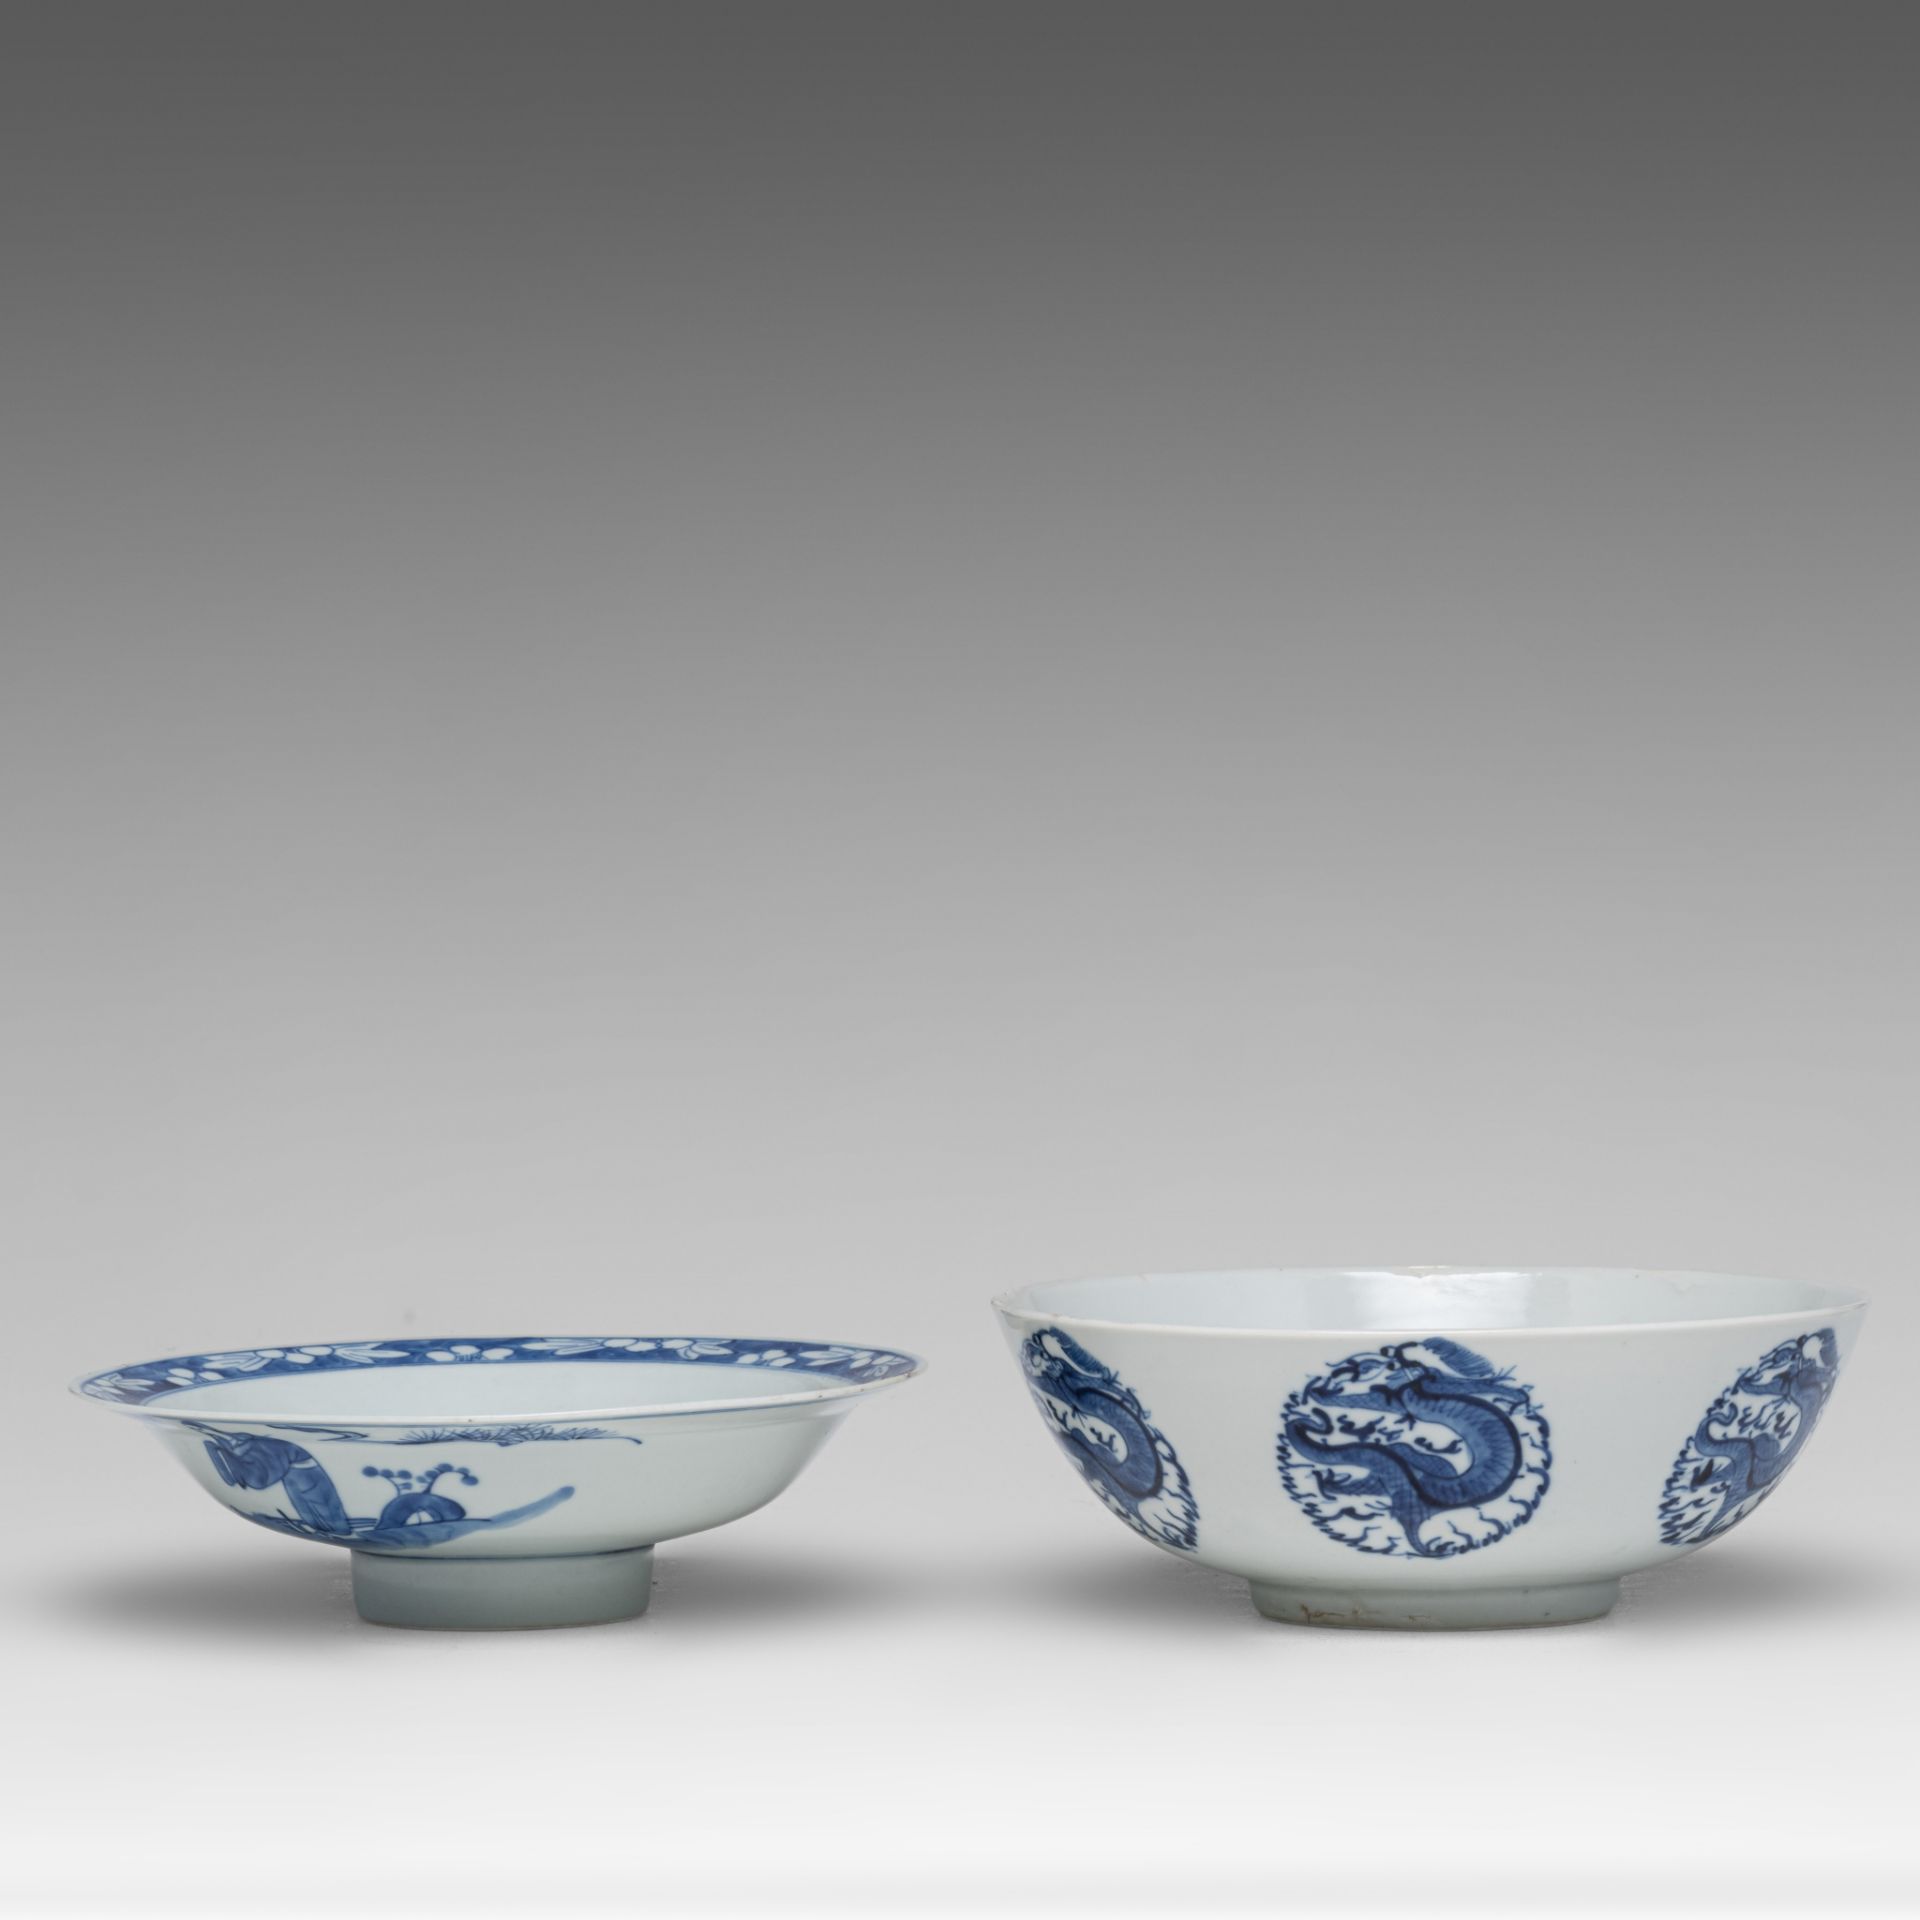 A collection of Chinese blue and white bowls and a pair of celadon vases, late 19thC/Republic period - Image 6 of 19